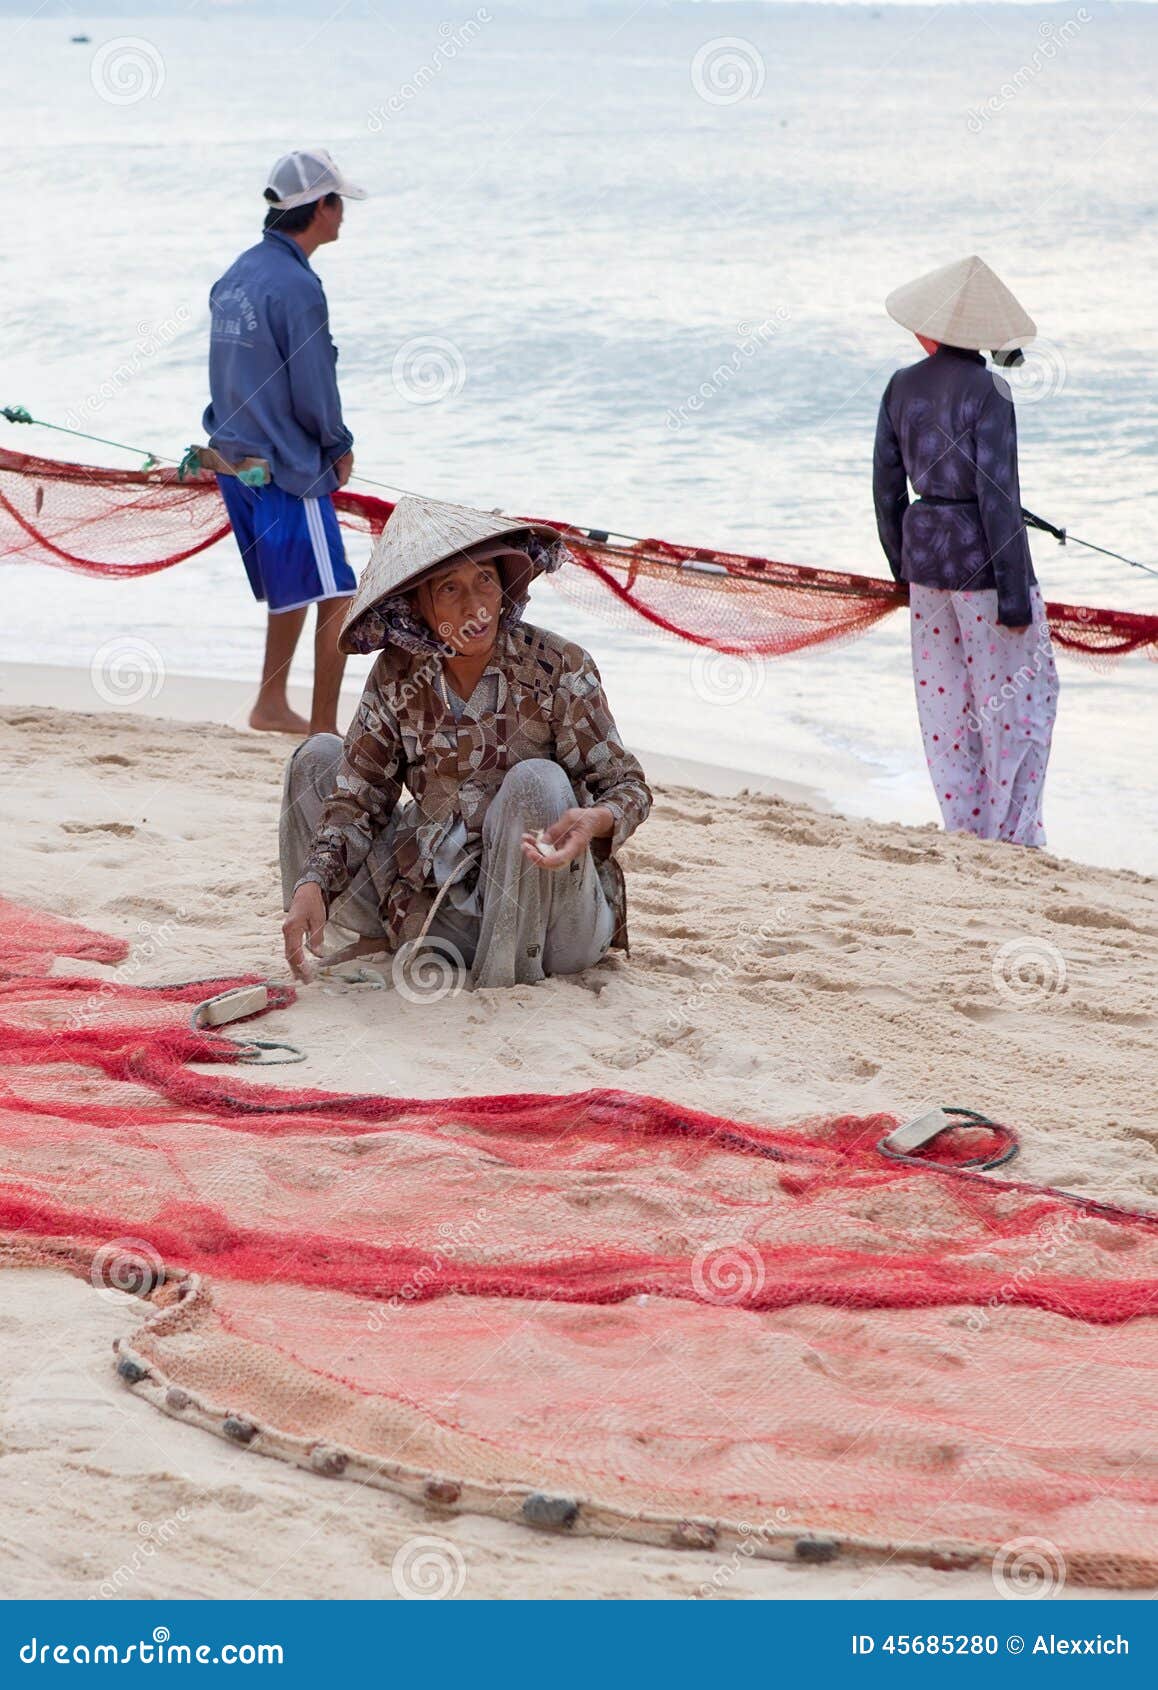 Fishermans Dragging Fishing Nets Editorial Image - Image of male